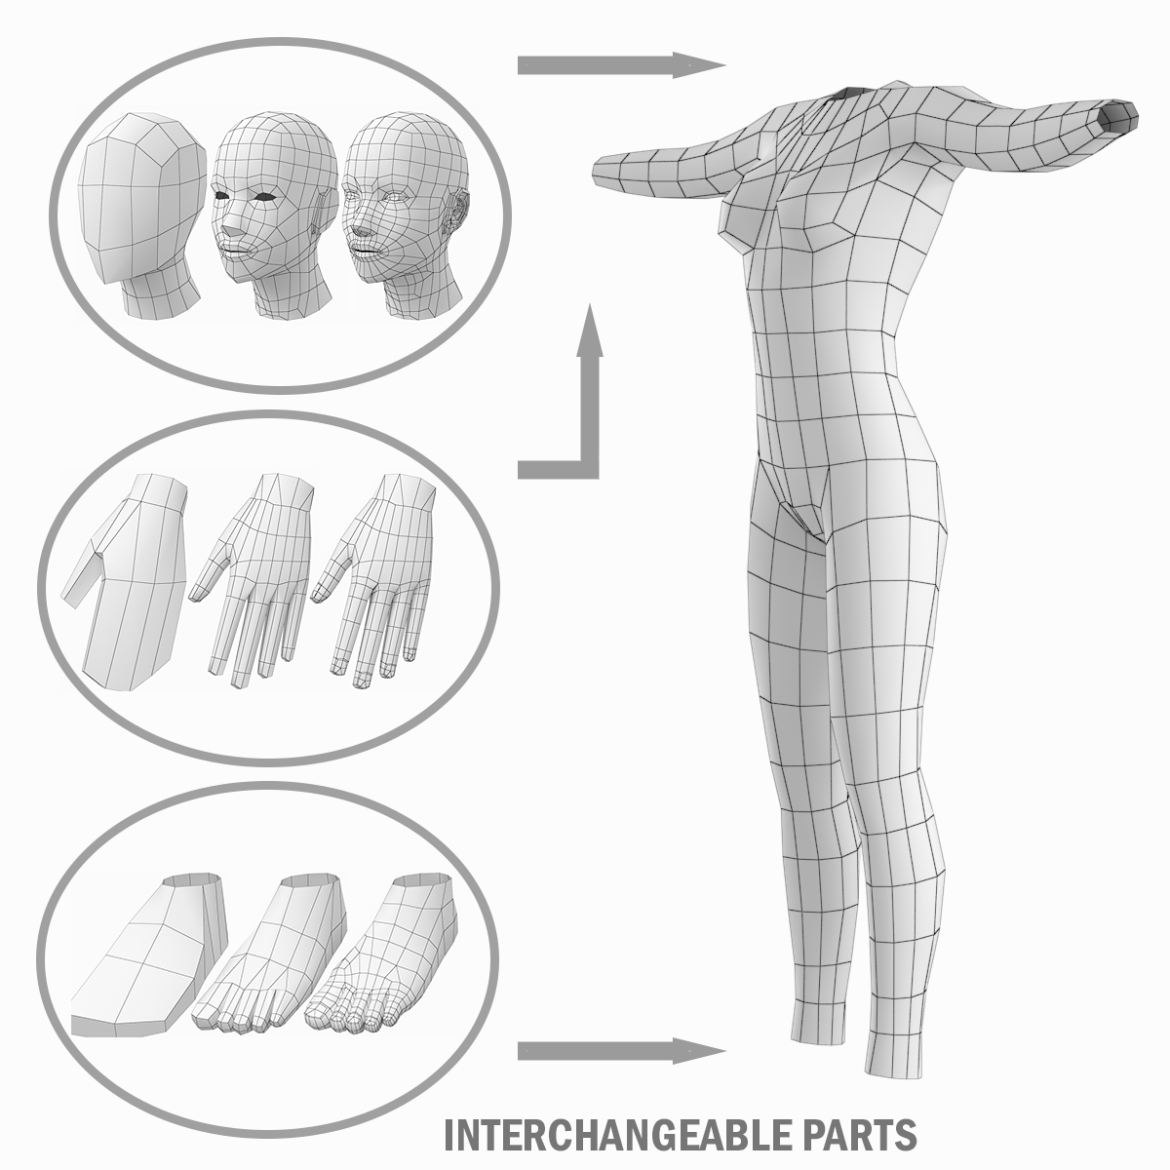  <a class="continue" href="https://www.flatpyramid.com/3d-models/characters-3d-models/human-types/female/female-base-mesh-natural-proportions-in-t-pose/">Continue Reading<span> Female Base Mesh Natural Proportions in T-Pose</span></a>